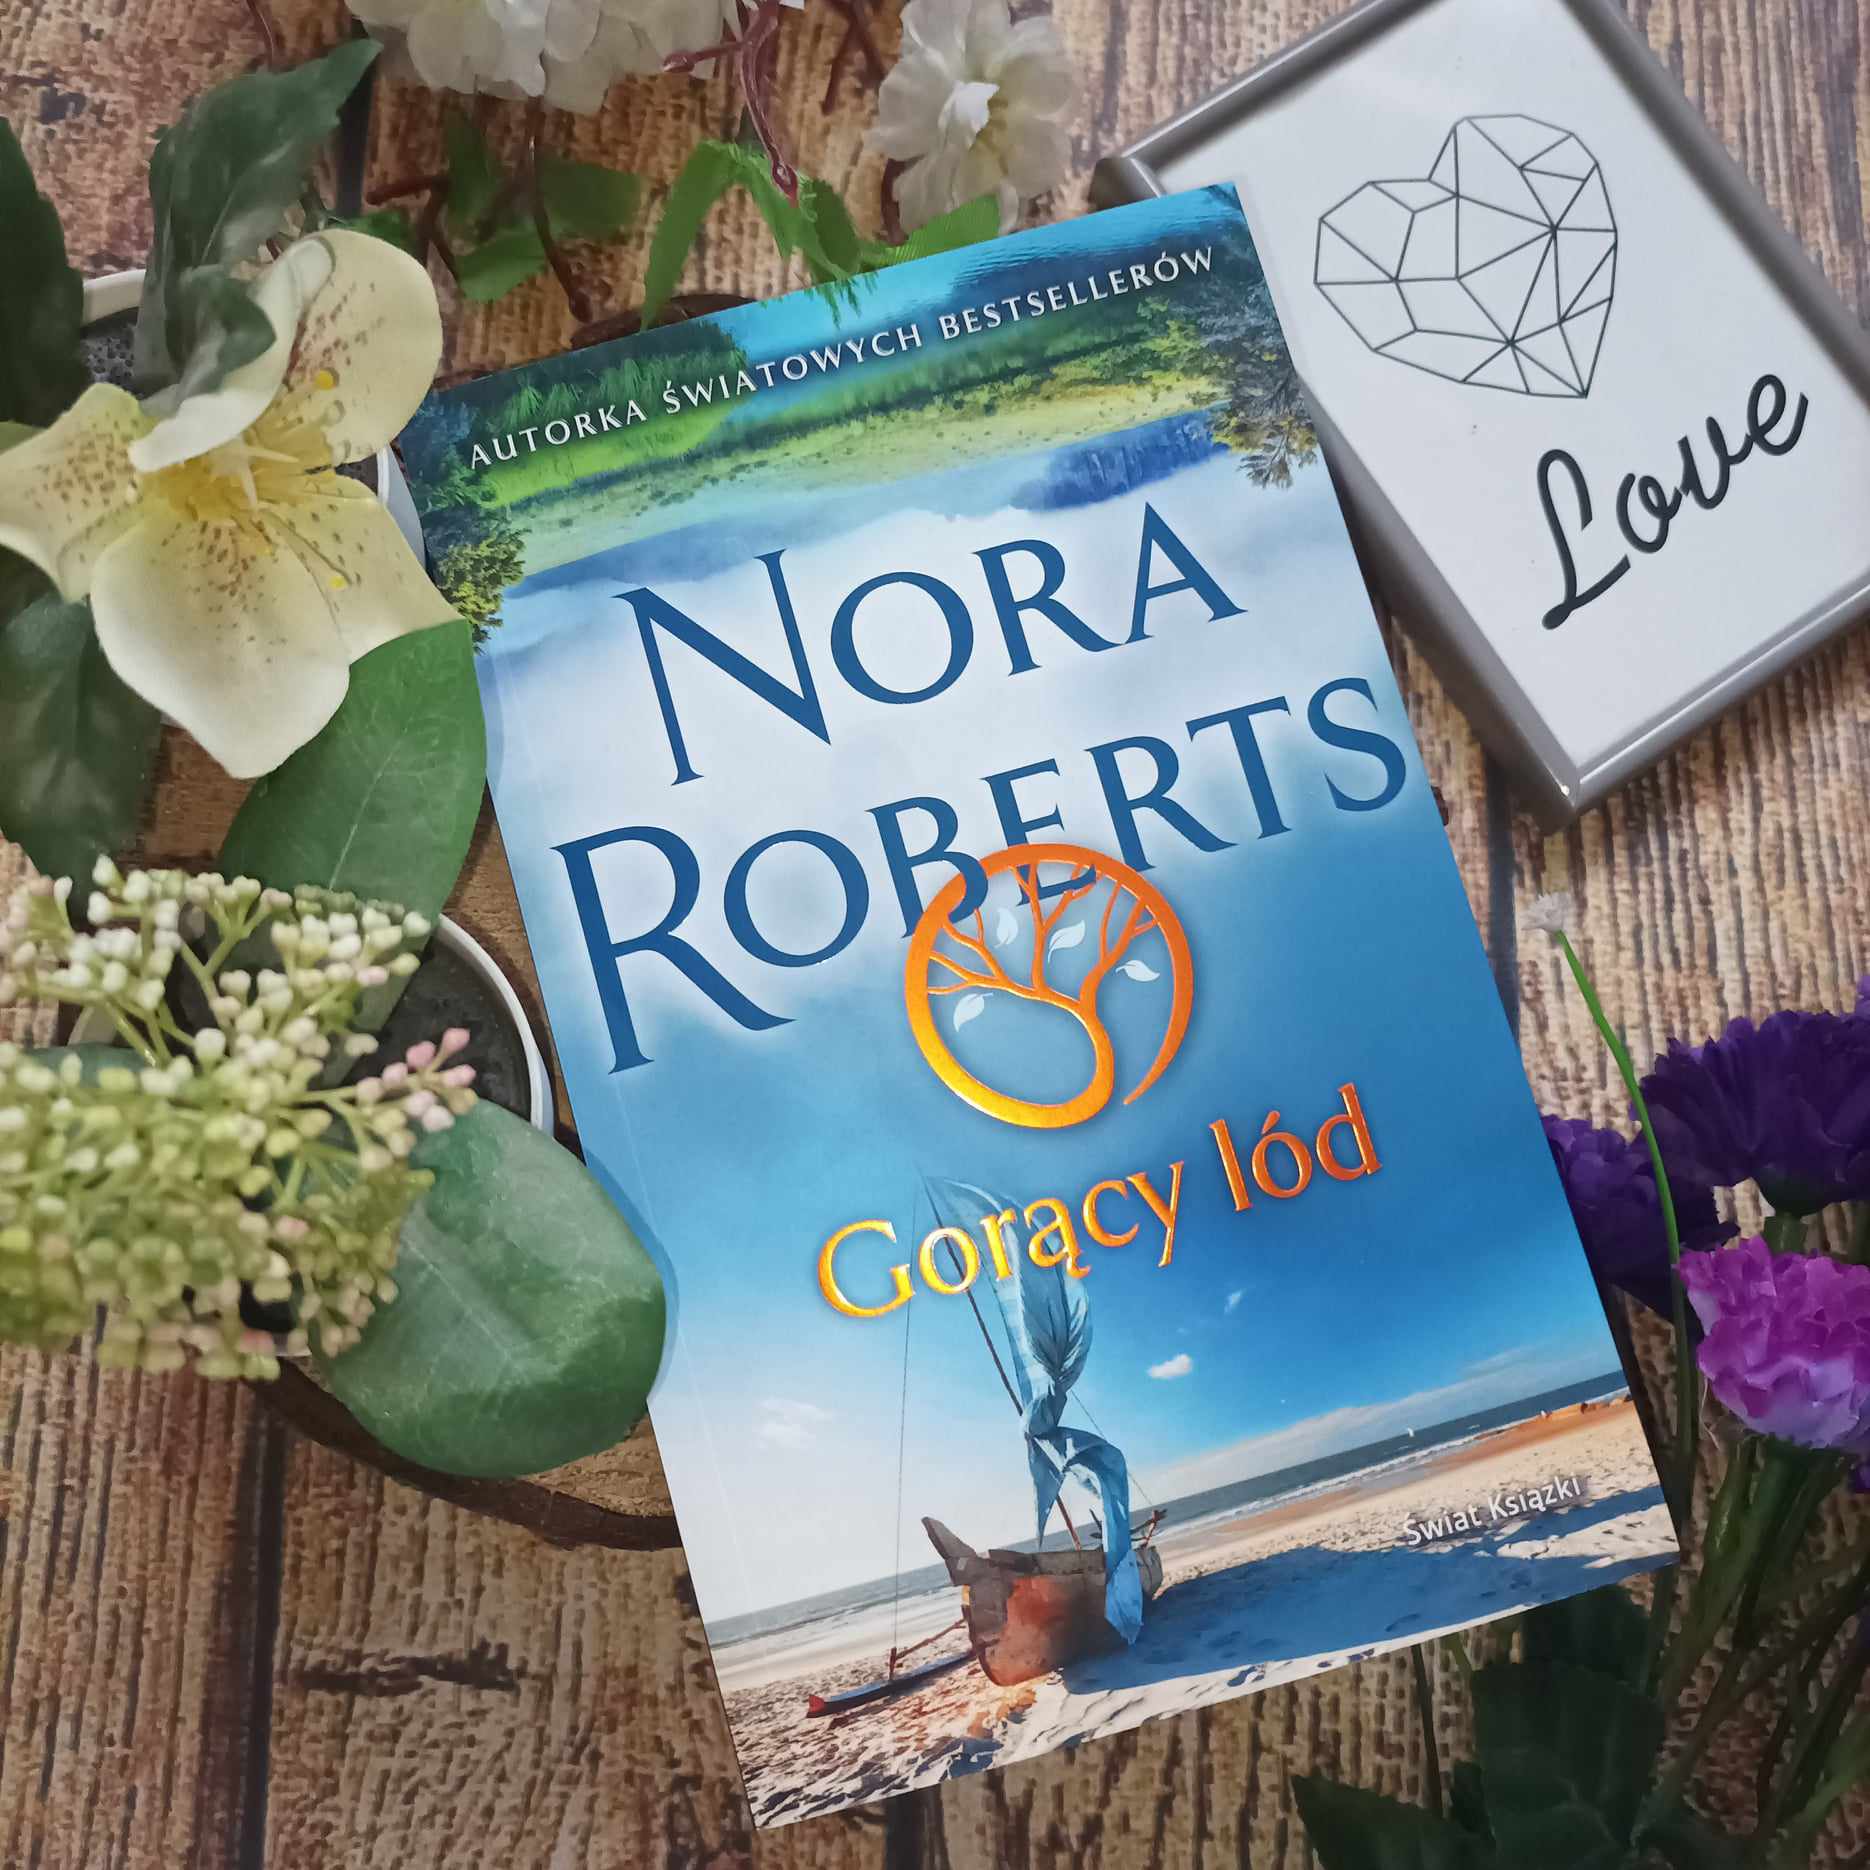 You are currently viewing Gorący lód Nora Roberts